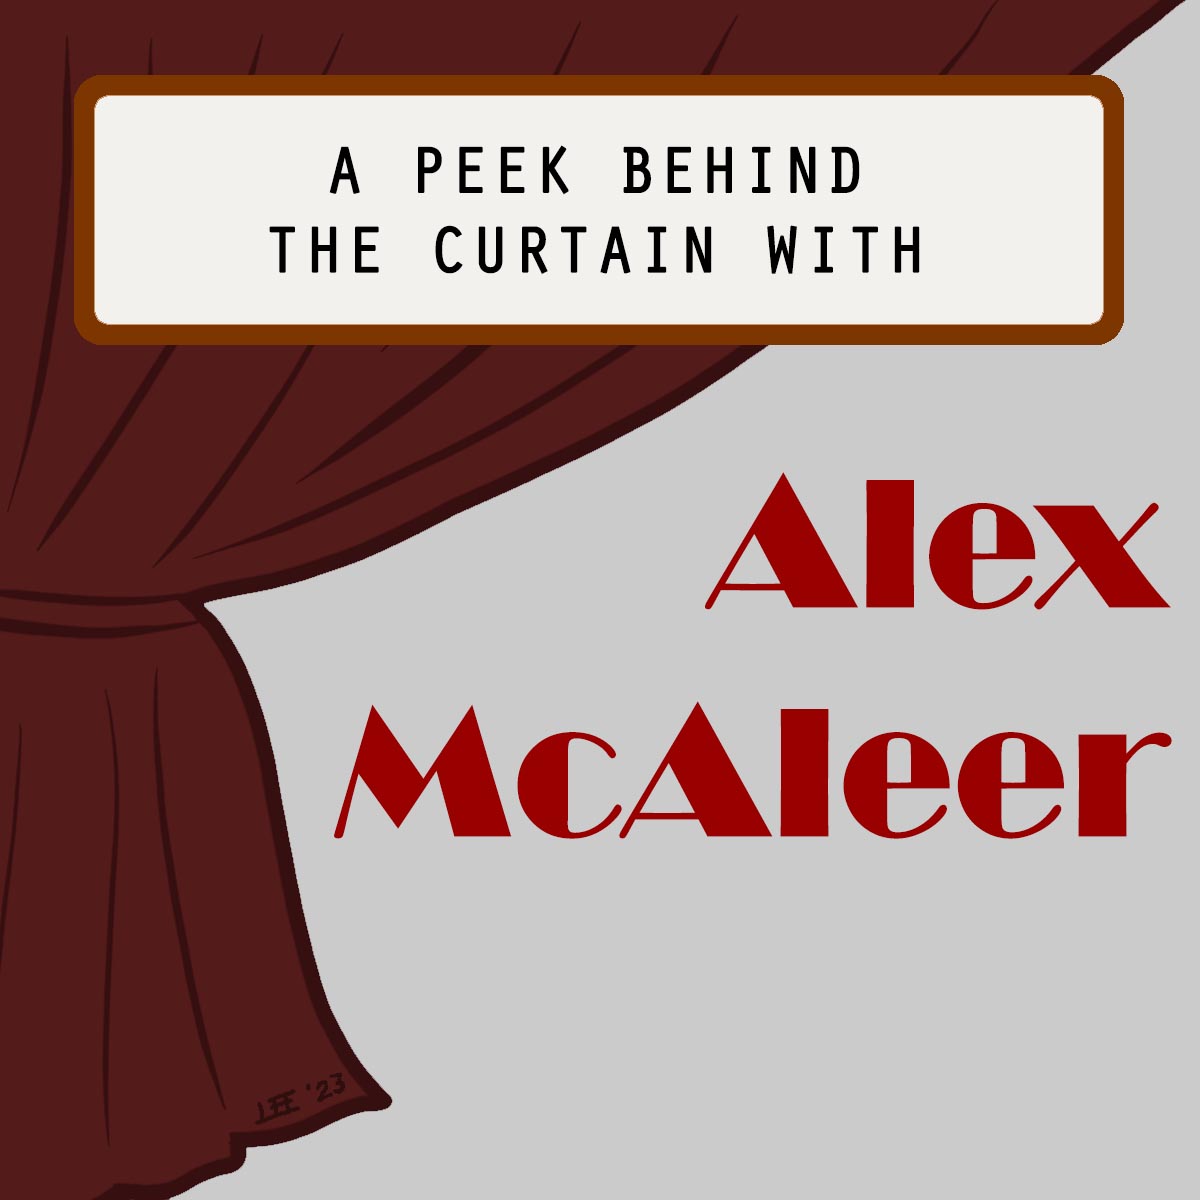 A peek behind the curtain with Alex McAleer